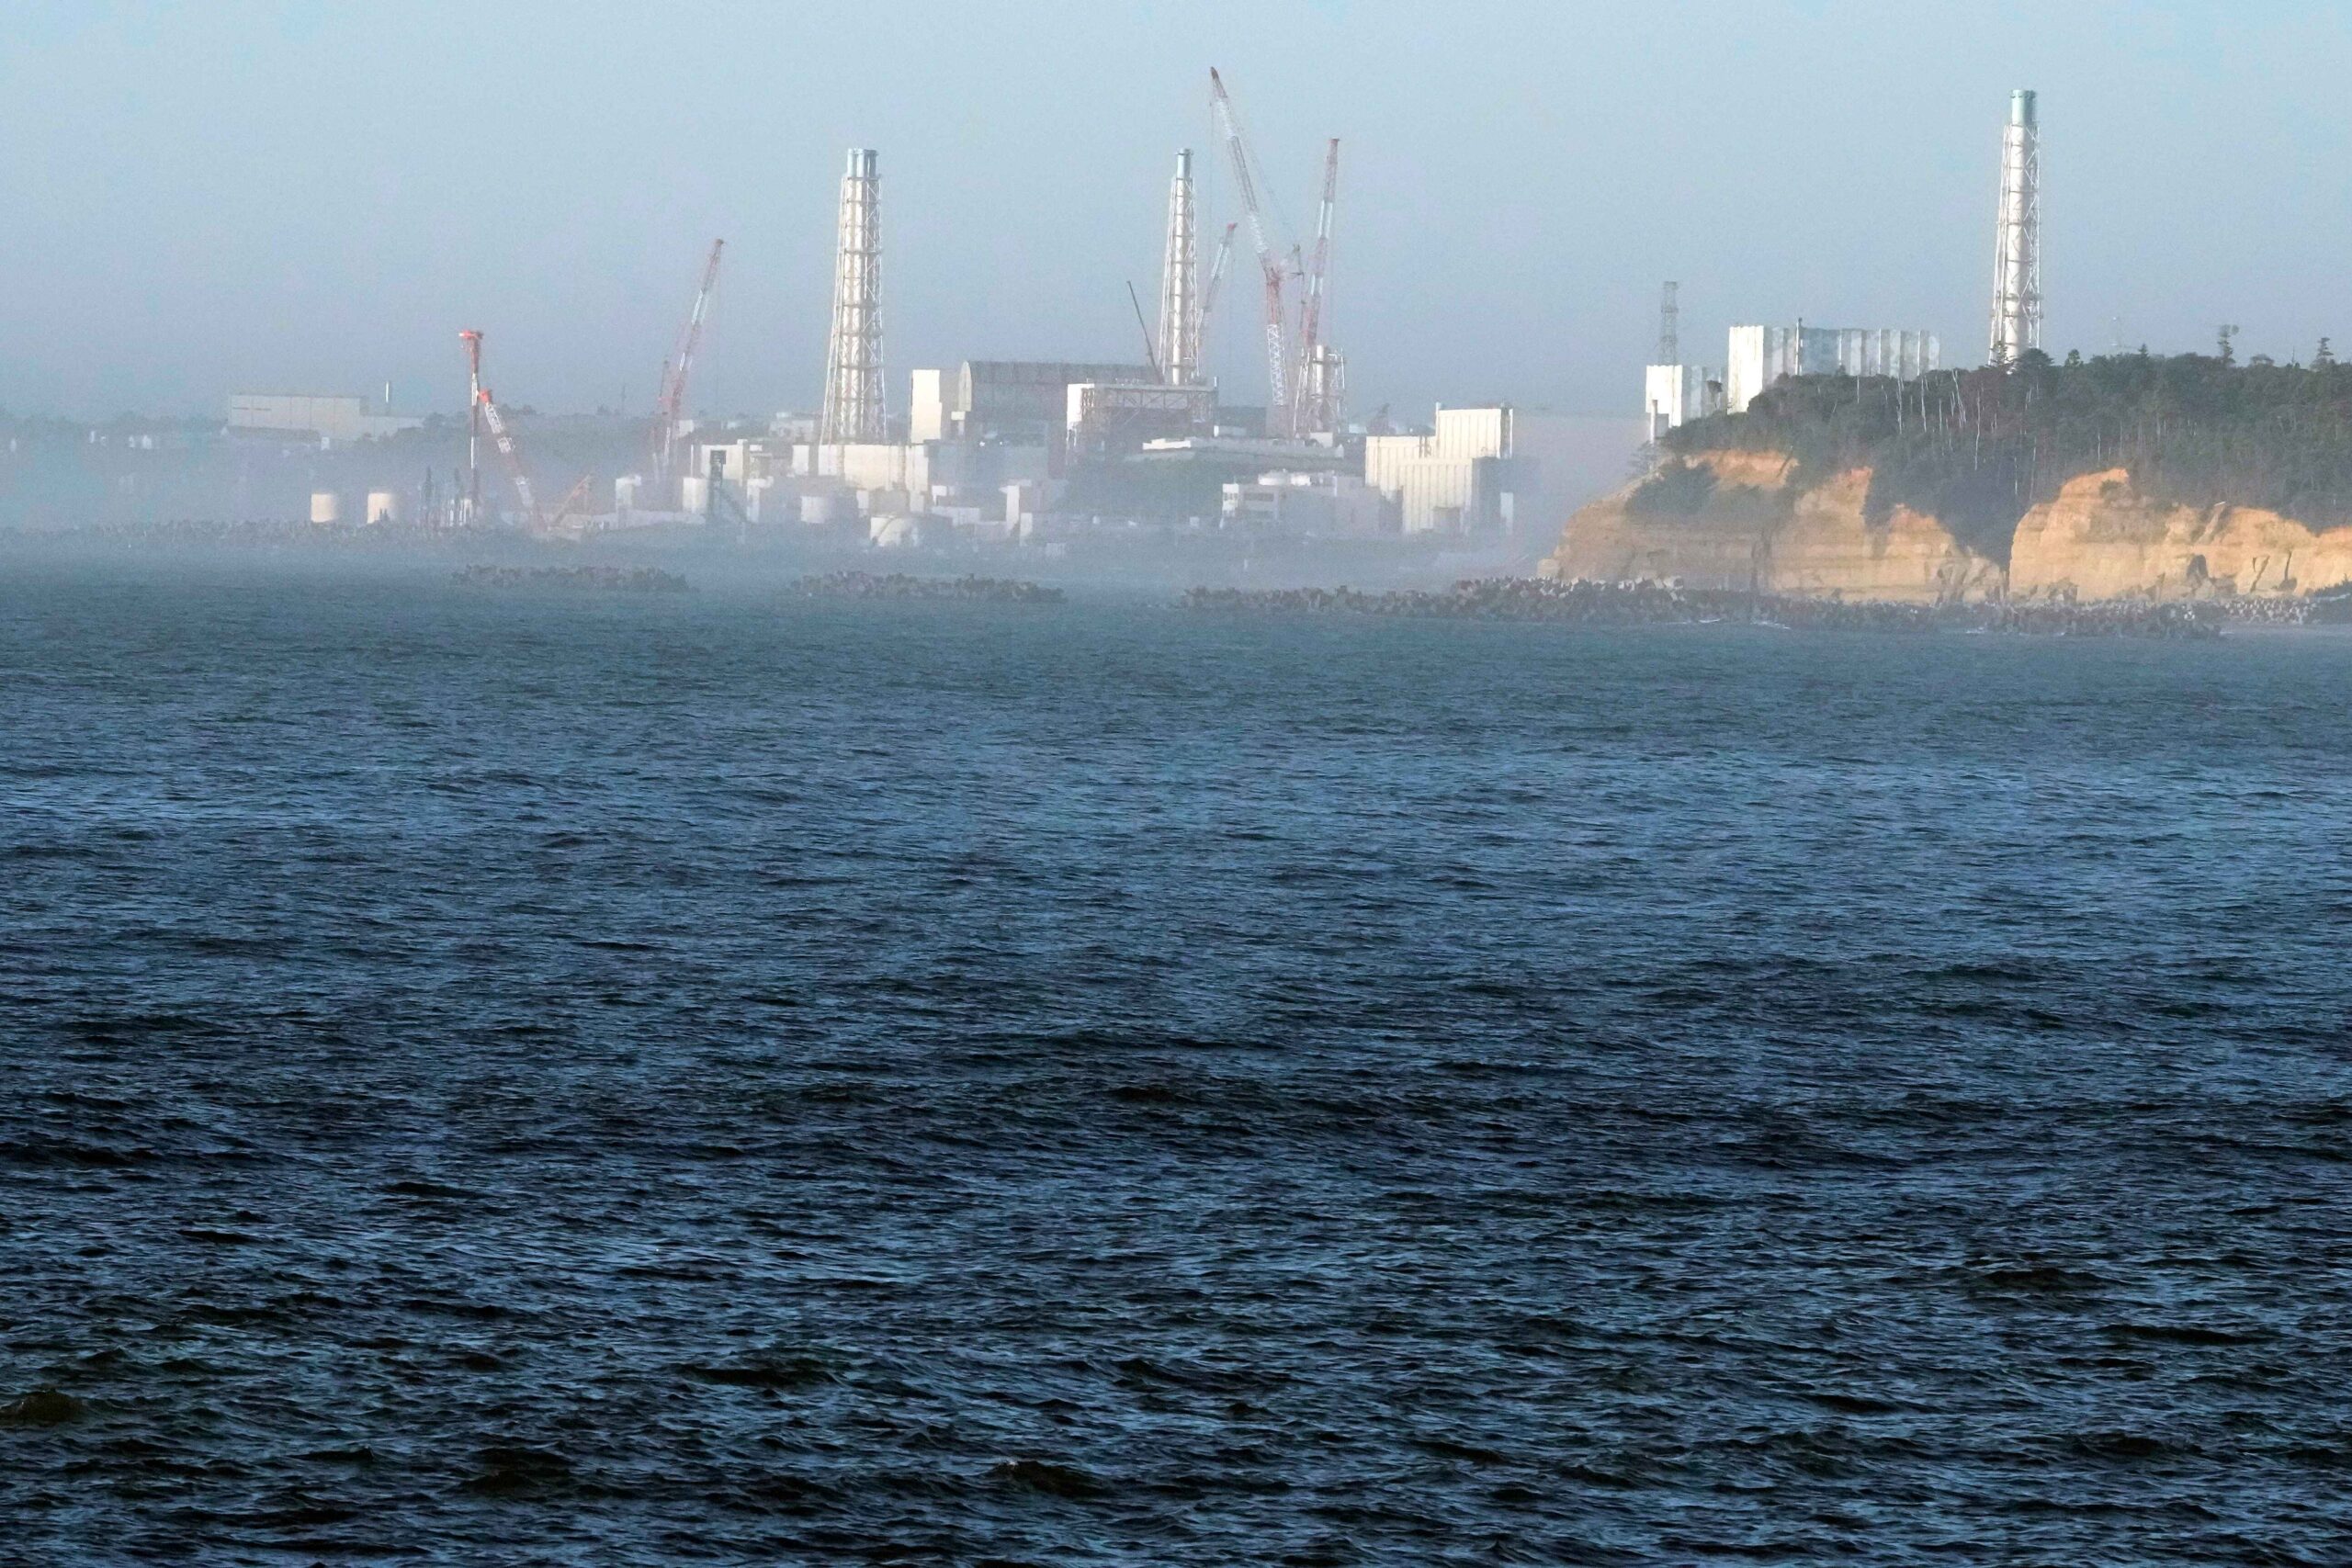 Japan is pumping wastewater from the defunct Fukushima Daiichi nuclear power plant into the Pacific Ocean, prompting protests from neighboring Asian countries. (AP Photo/Eugene Hoshiko)